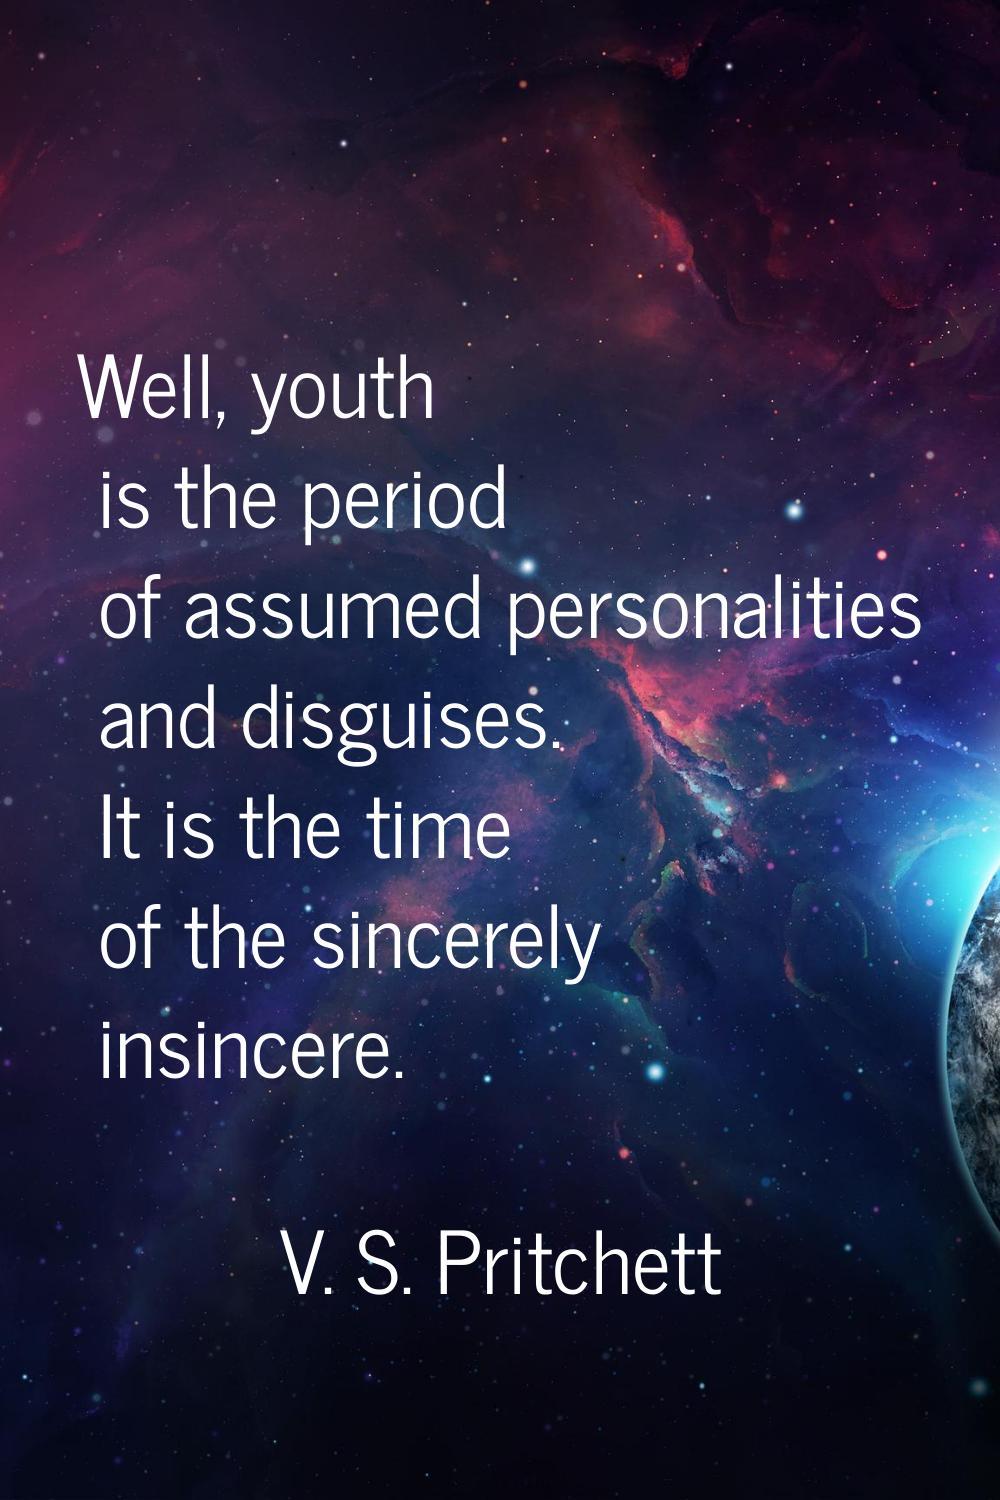 Well, youth is the period of assumed personalities and disguises. It is the time of the sincerely i